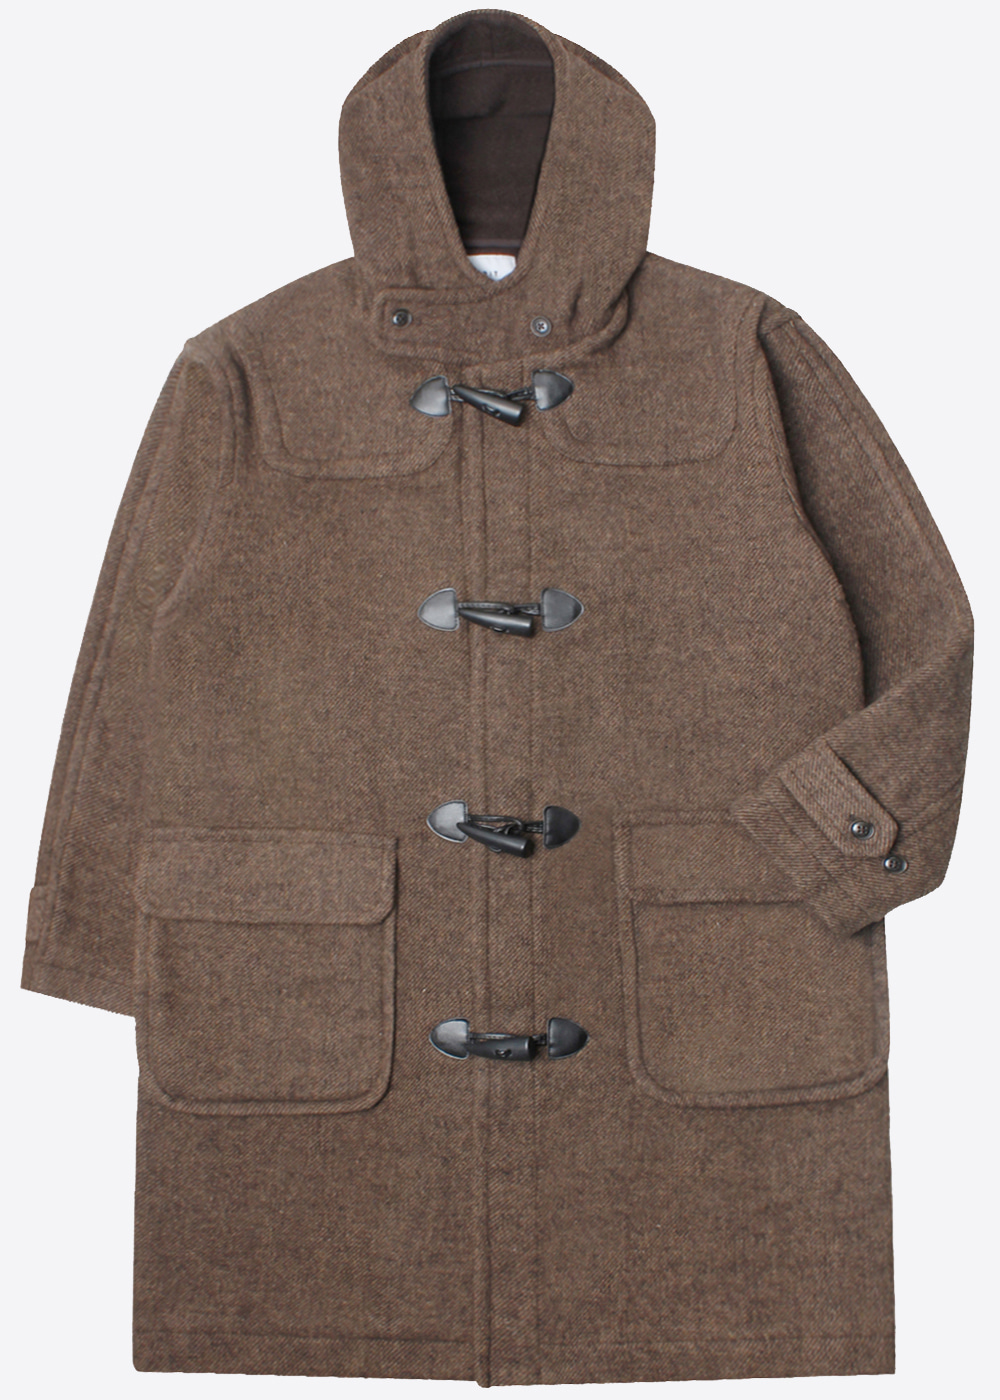 INHERIT BY JOURNAL STANDARD ‘over fit’ poly,wool duffle coat